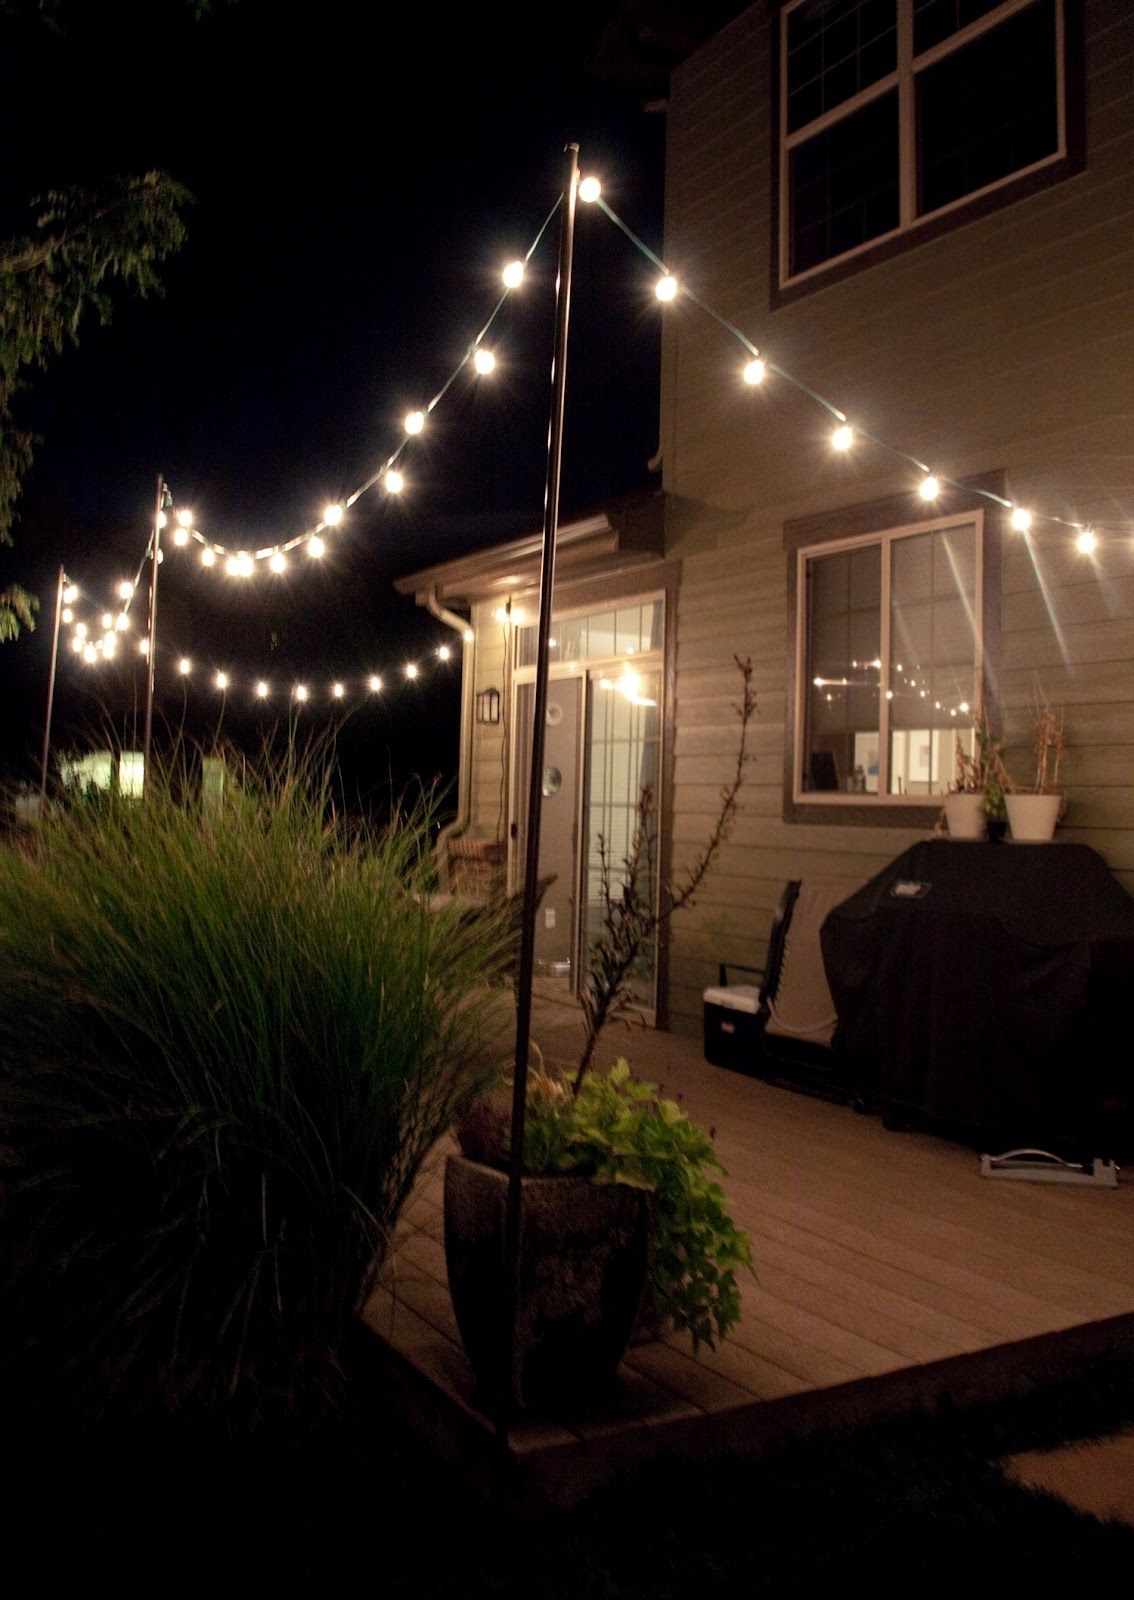 Outdoor Hanging String Lights | Catalunyateam Home Ideas : Limit An Pertaining To Outdoor String Lanterns (View 11 of 20)